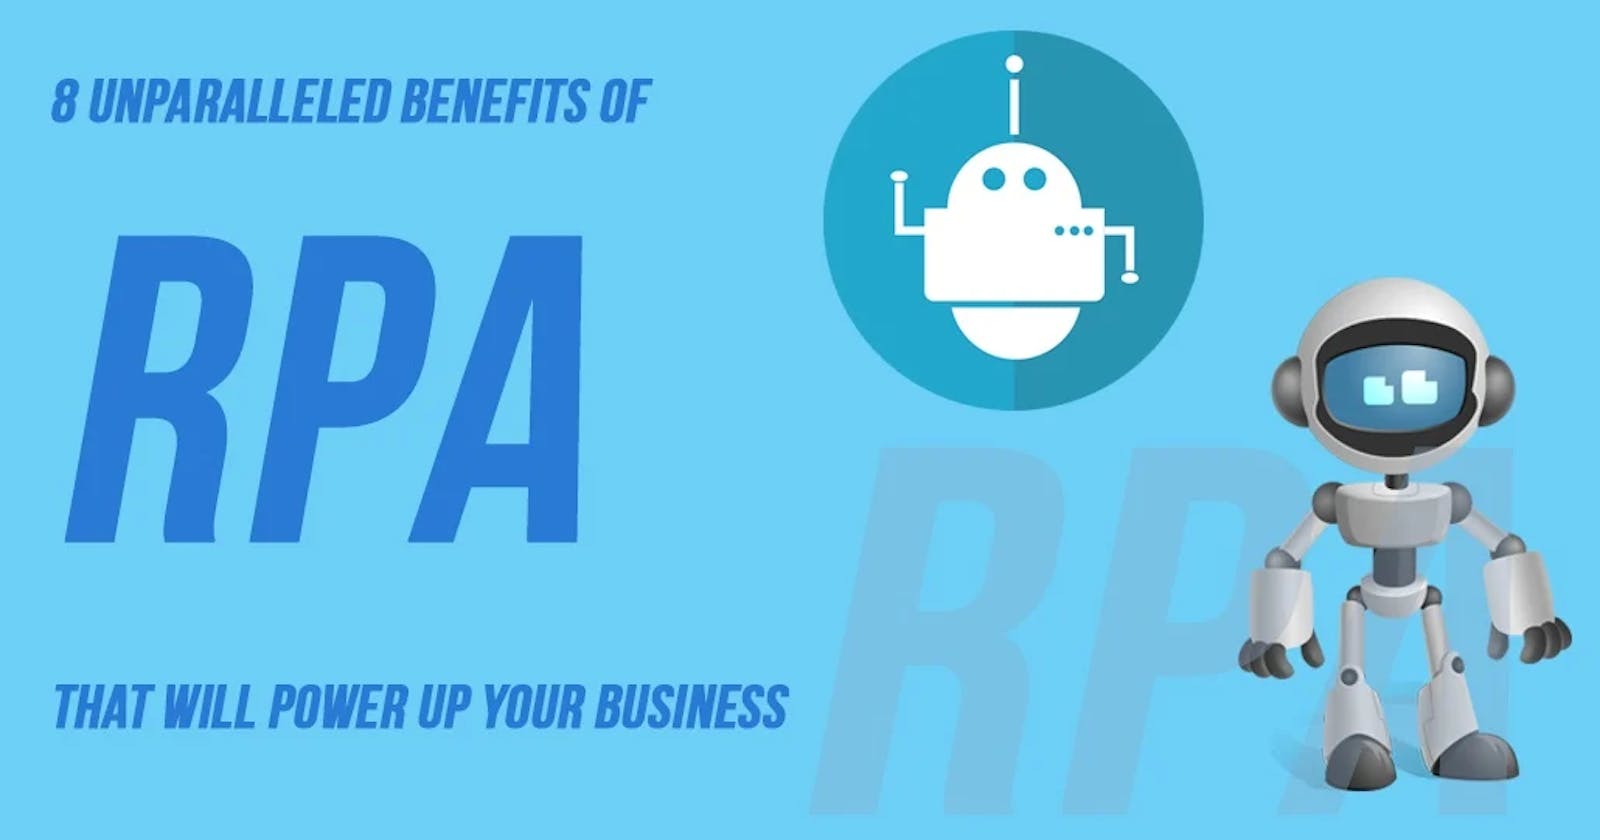 8 Unparalleled Benefits of RPA That Will Power Up Your Business